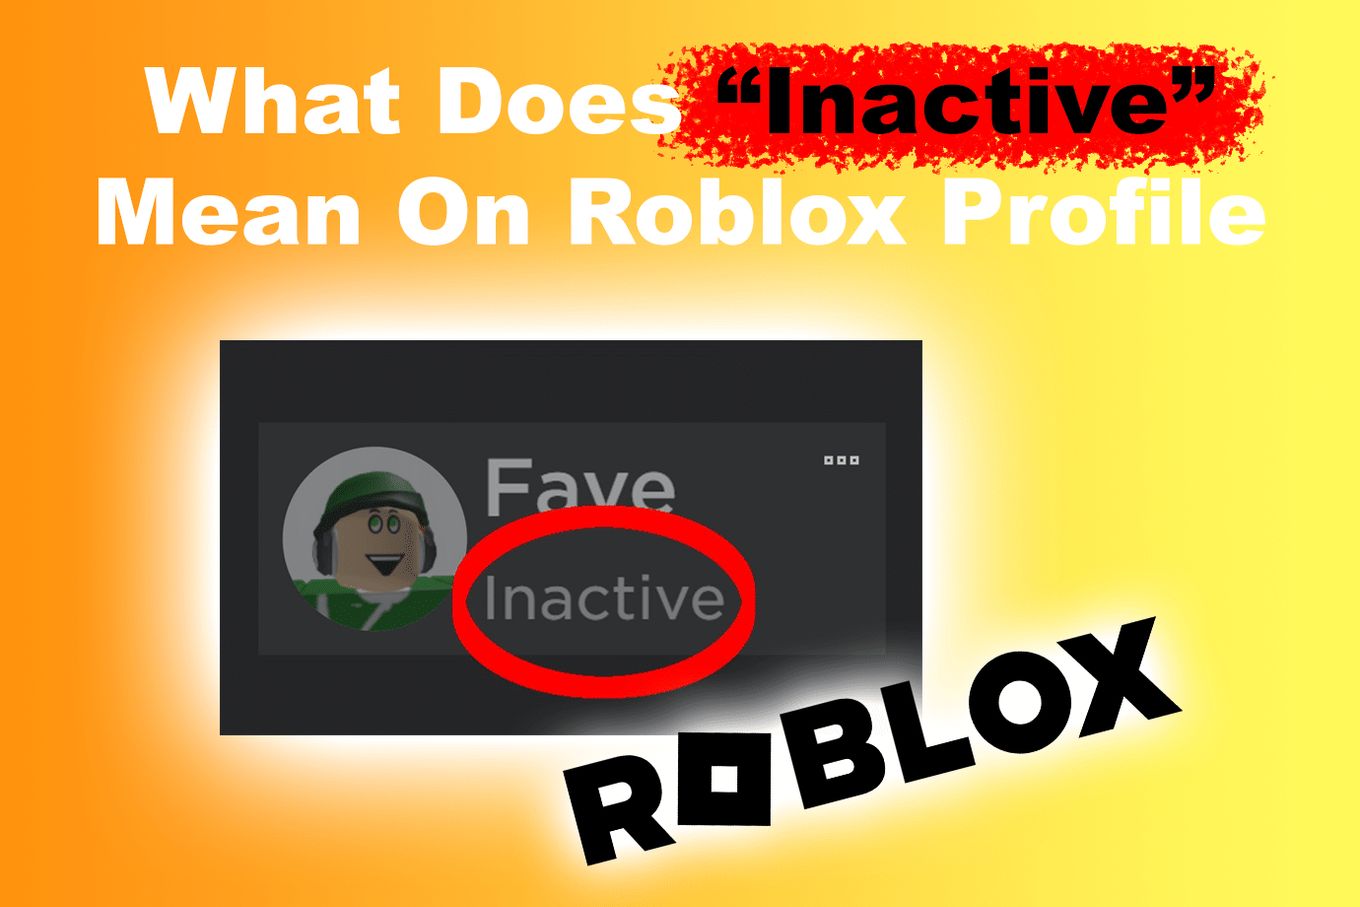 What Does Inactive Mean on Roblox